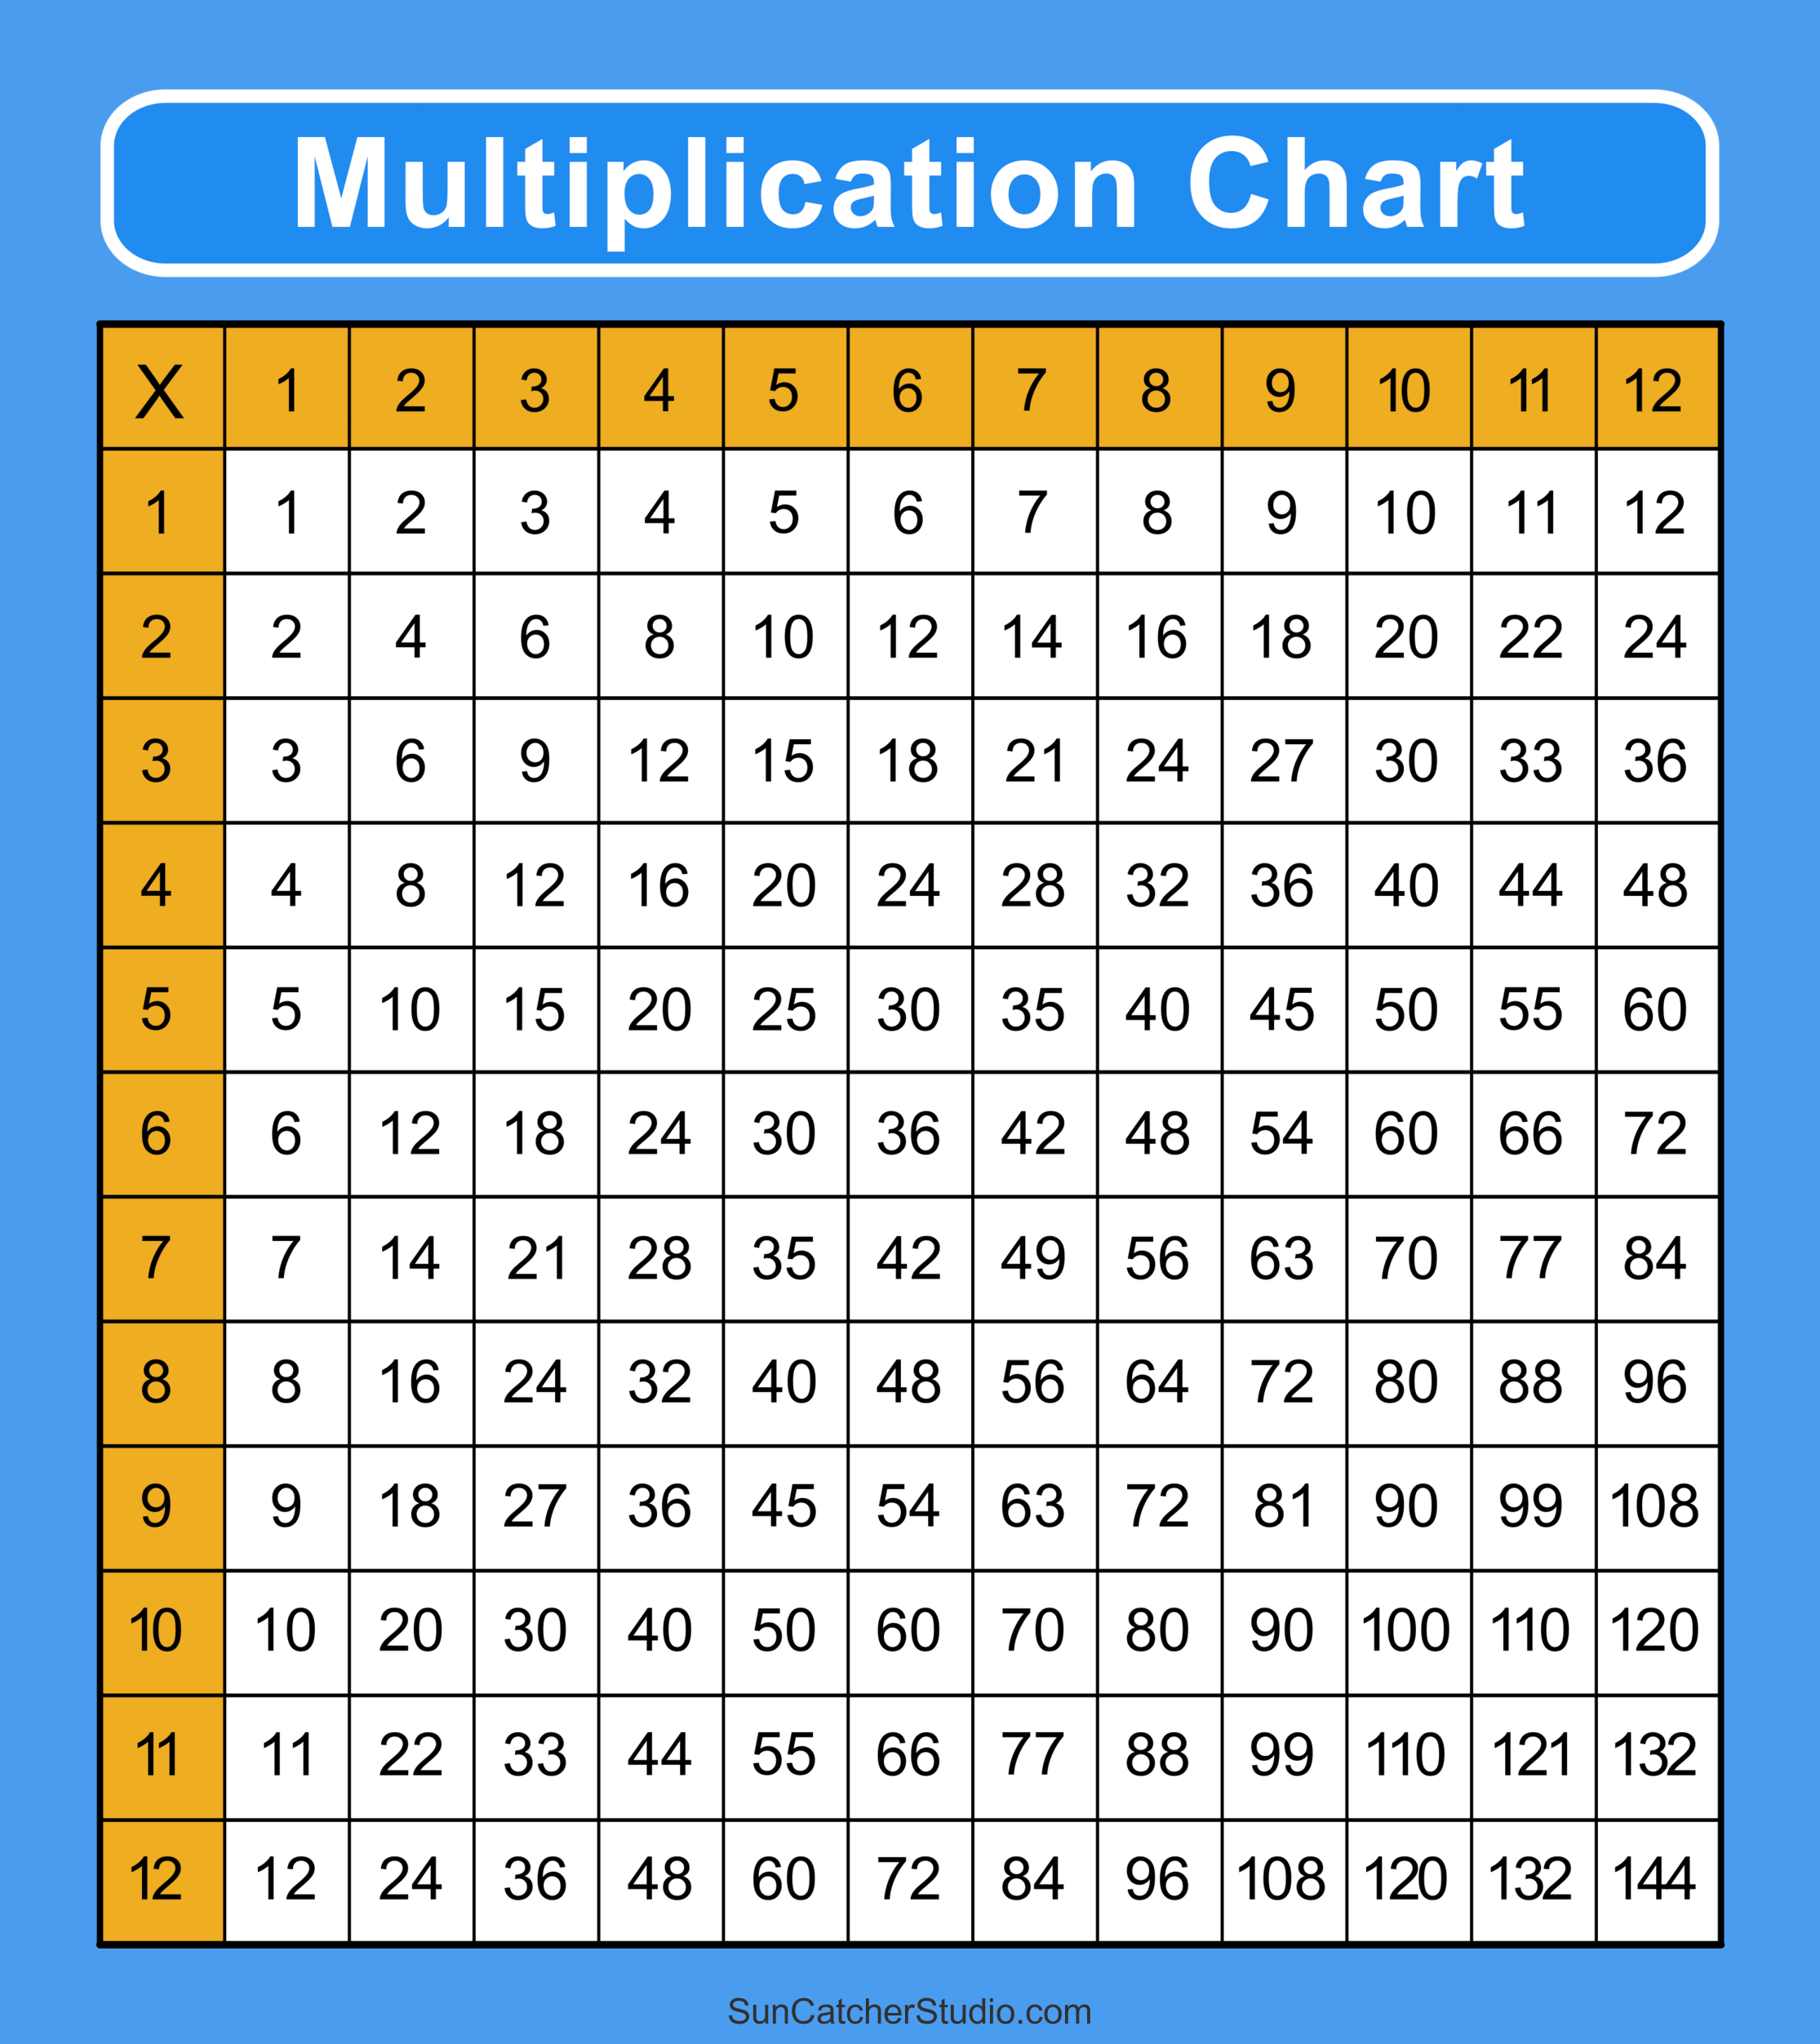 Multiplication Charts (PDF): Free Printable Times Tables – DIY Projects ...